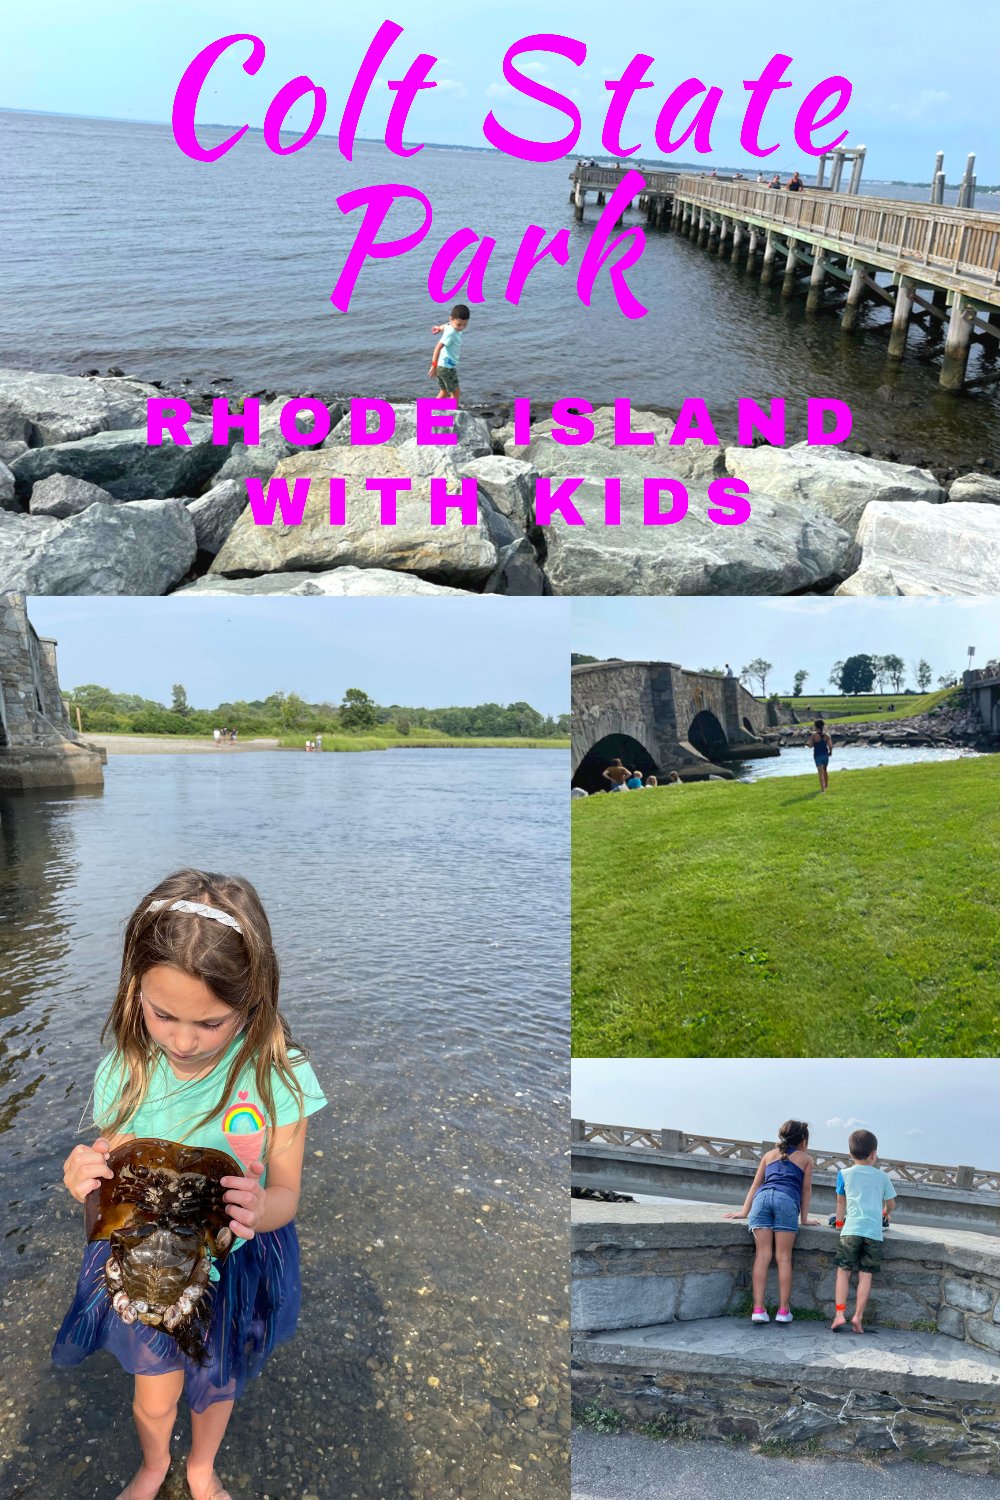 Visit Colt State Park in Bristol, Rhode Island with the kids